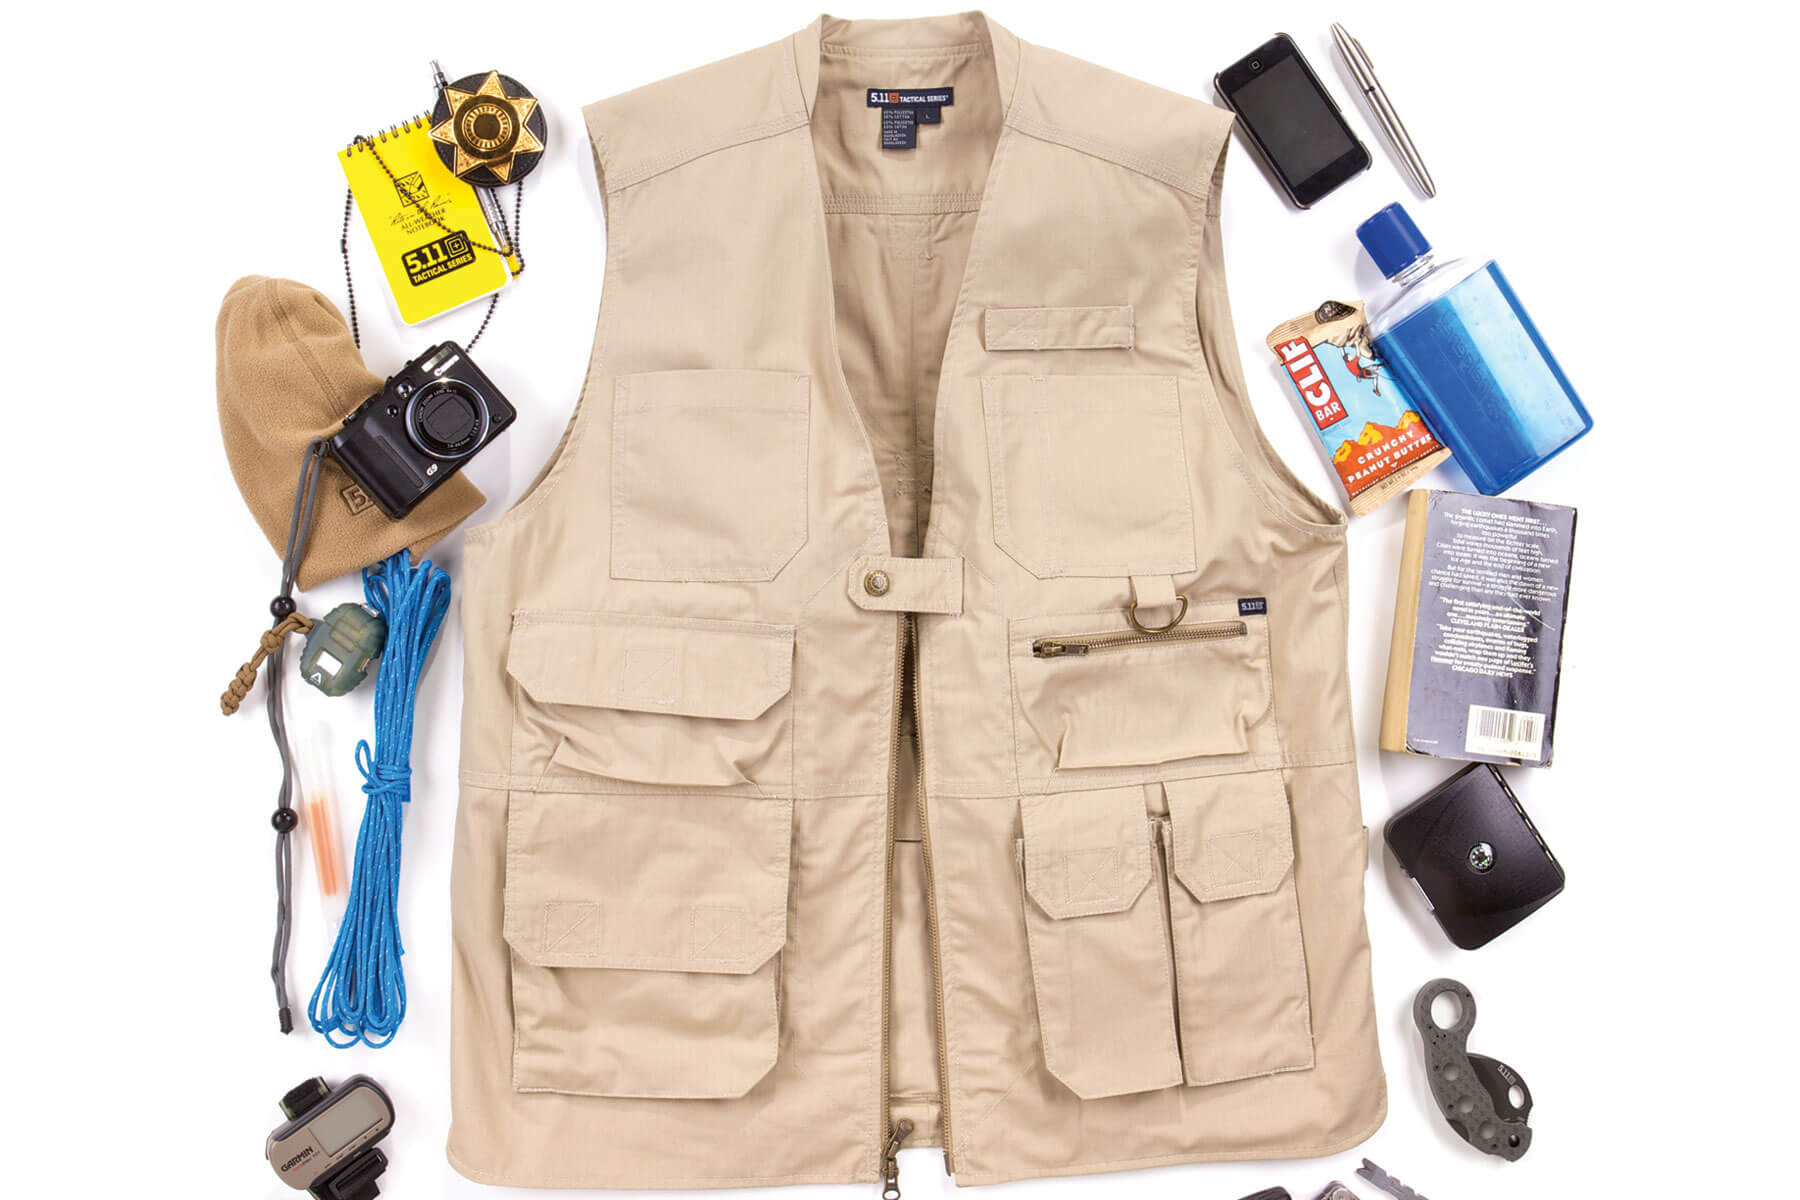 Choosing the Right Vest for Concealed Carry